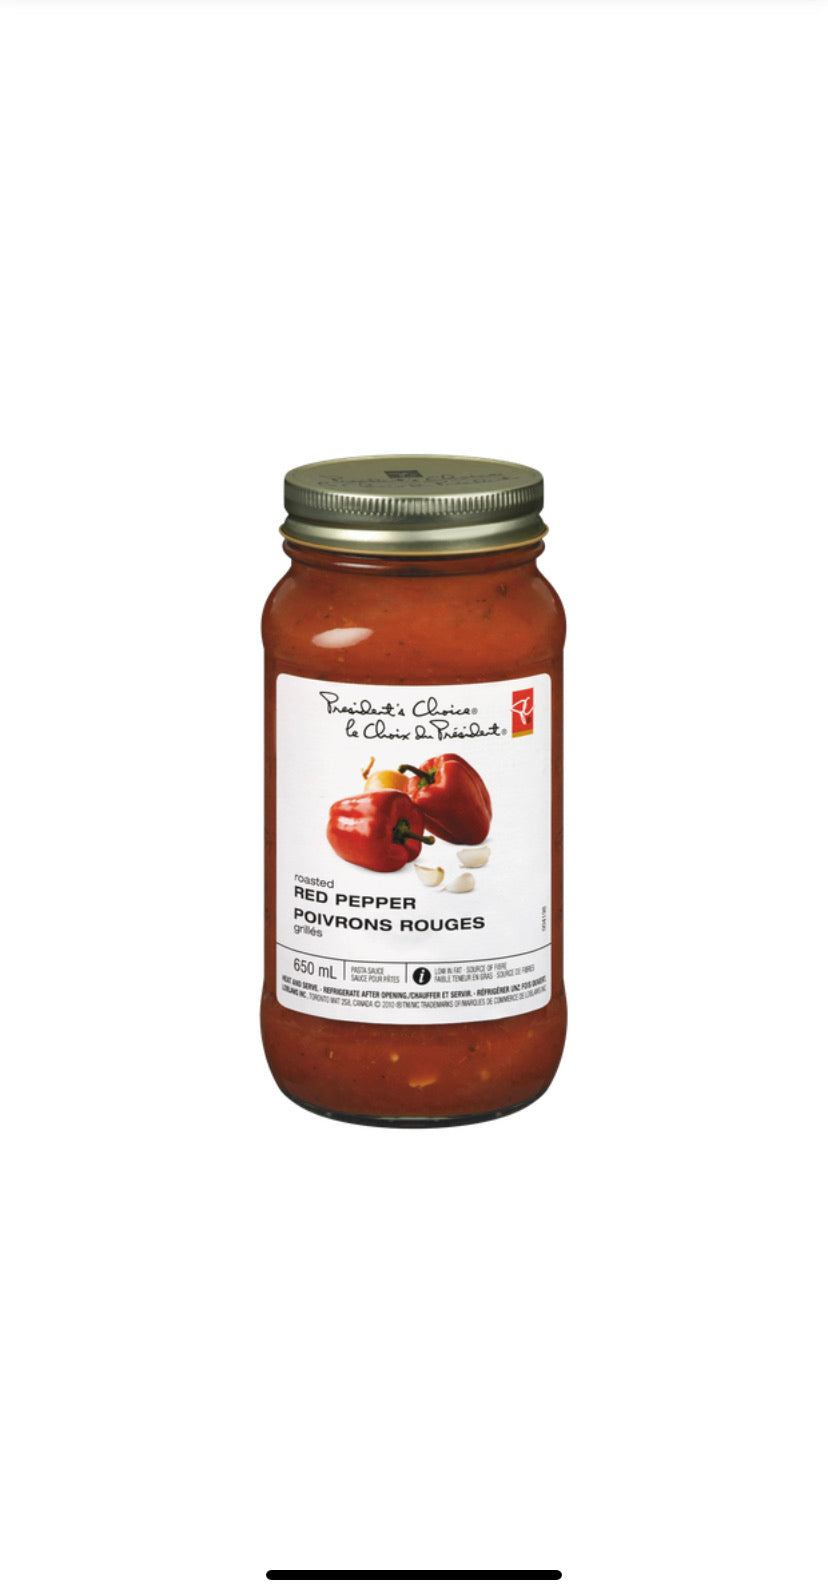 Pc roasted red pepper pasta sauce 650g